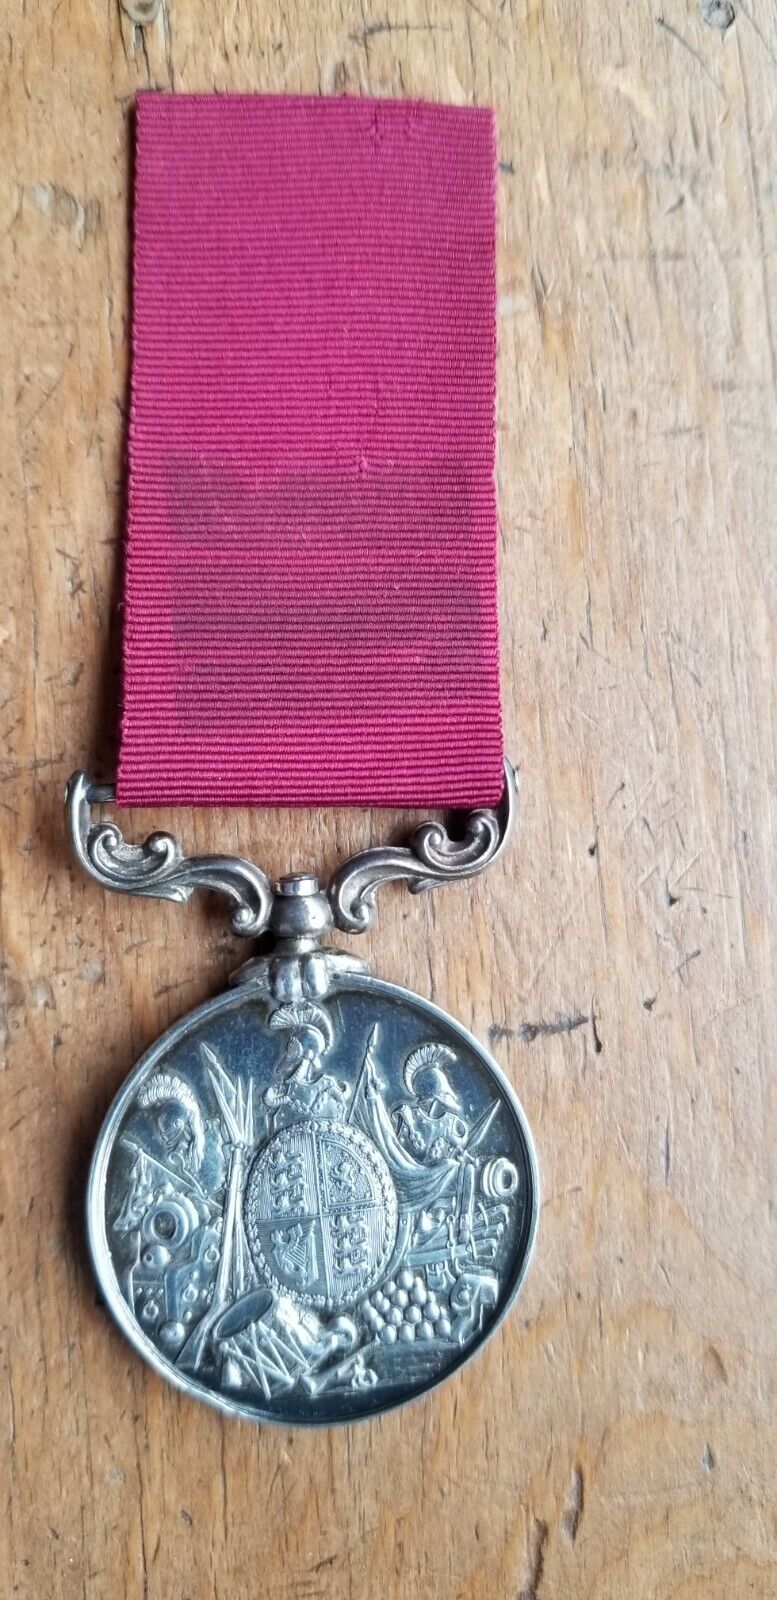 BRITISH Army Long Service Medal Victorian named SRG. G.E HARDWICK R.E.